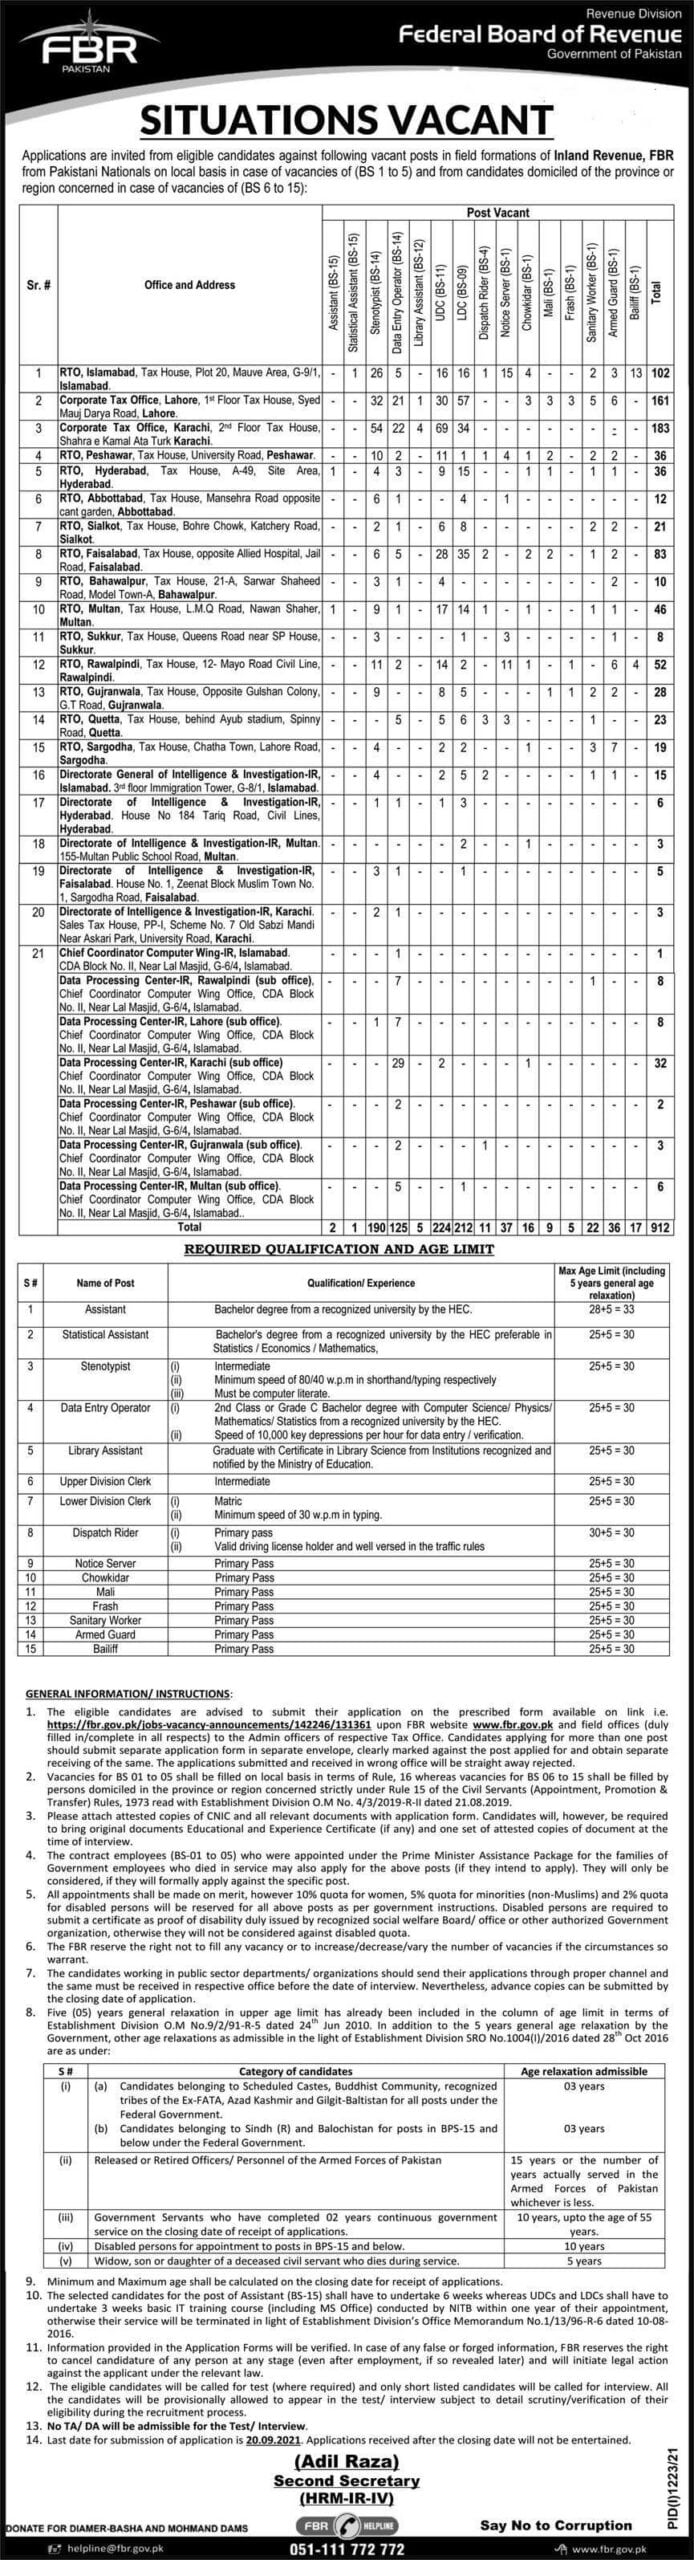 FBR JOBS 2021 with application form